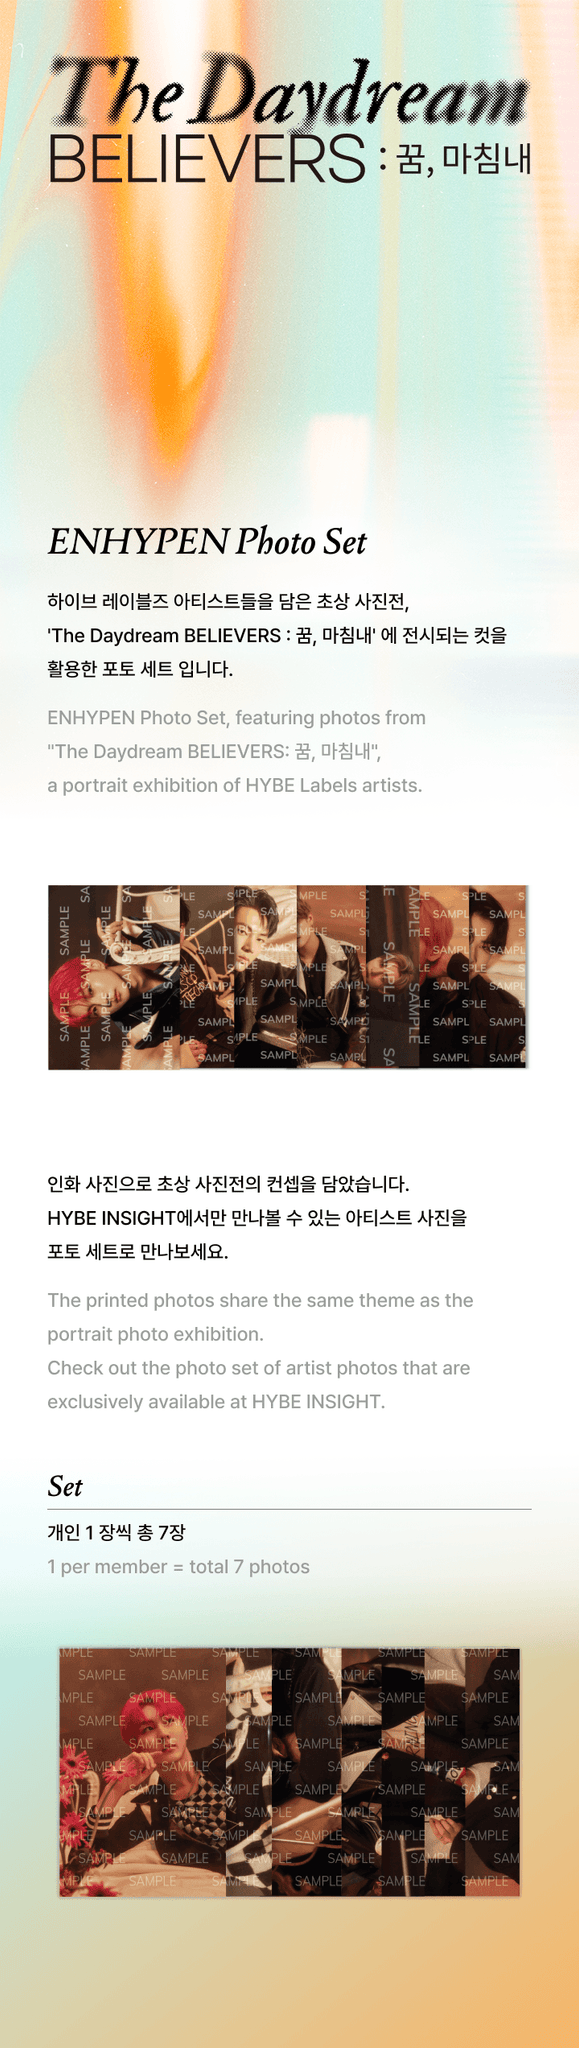 ENHYPEN The Daydream Believers Photo Set